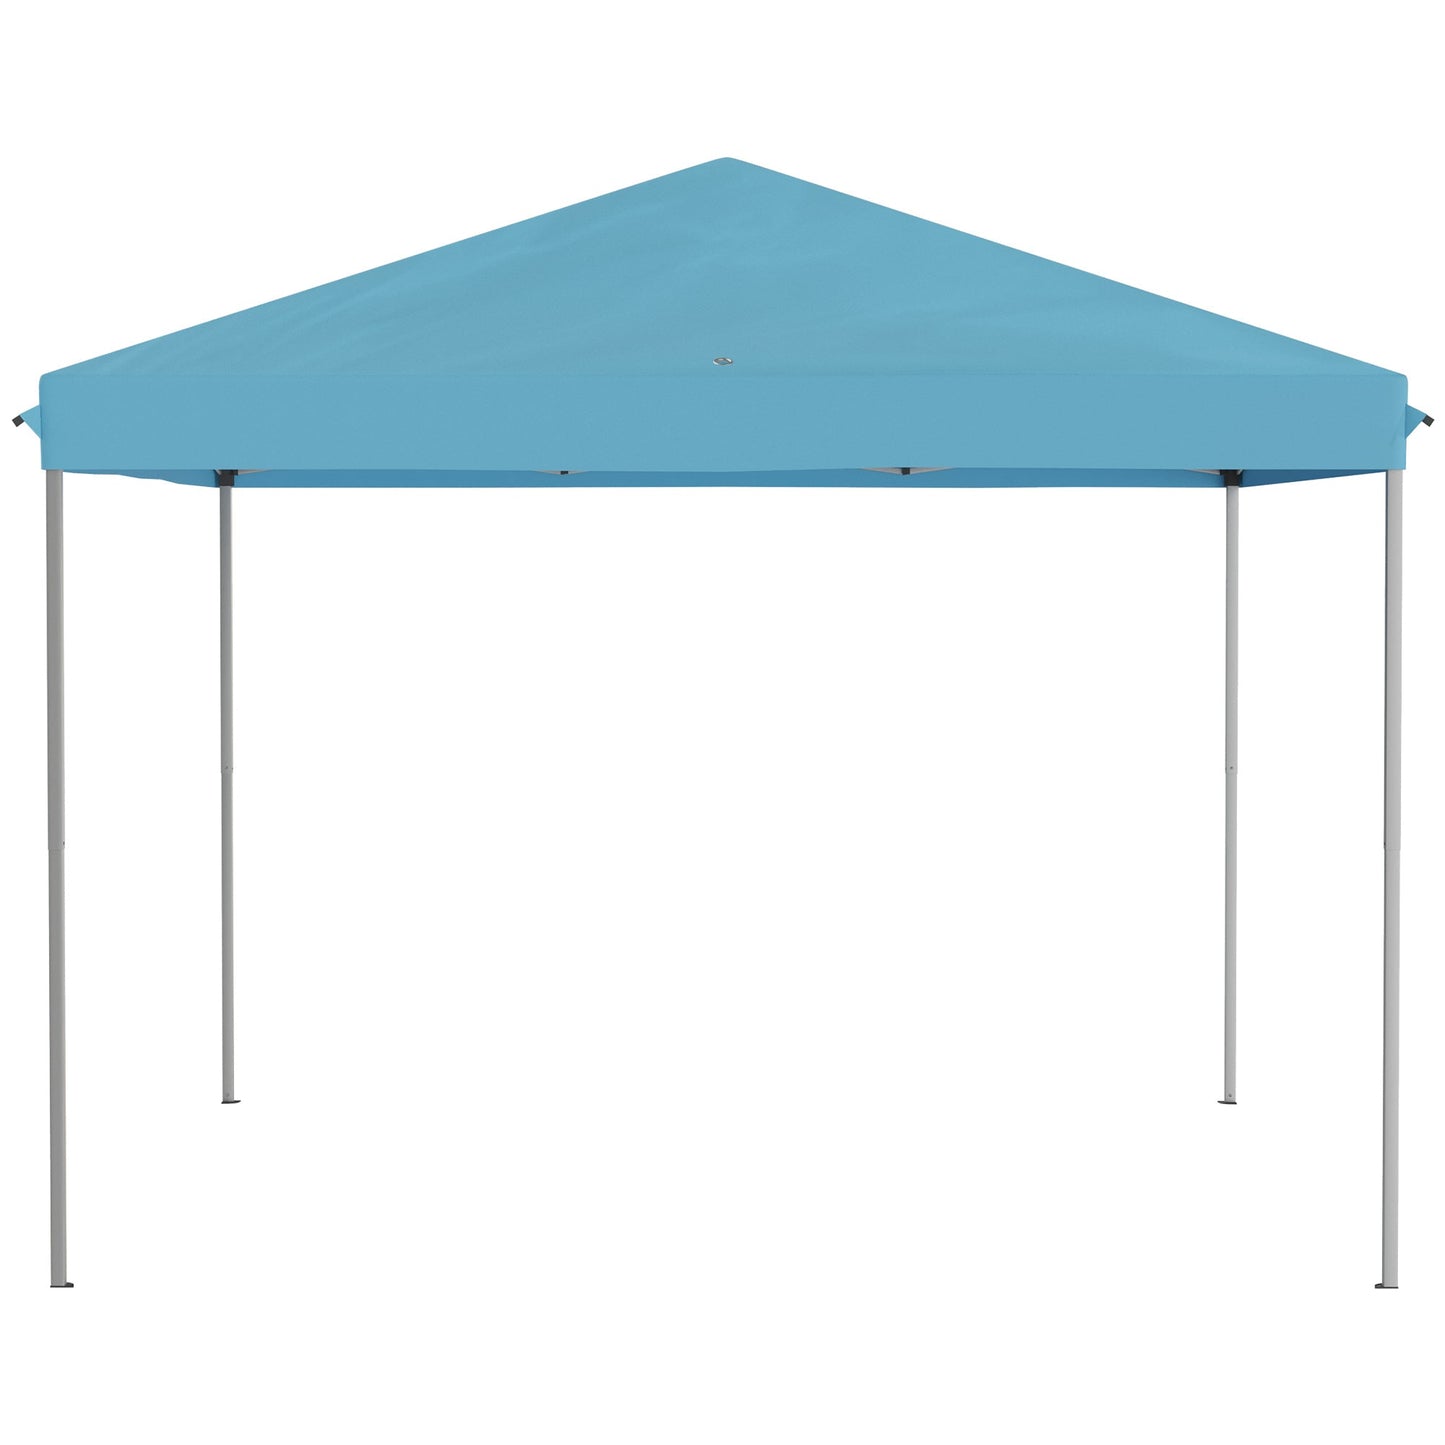 10' x 10' Pop Up Canopy Tent Gazebo with Removable Mesh Sidewall Netting, Carry Bag for Backyard Patio Outdoor, Light Blue - Gallery Canada